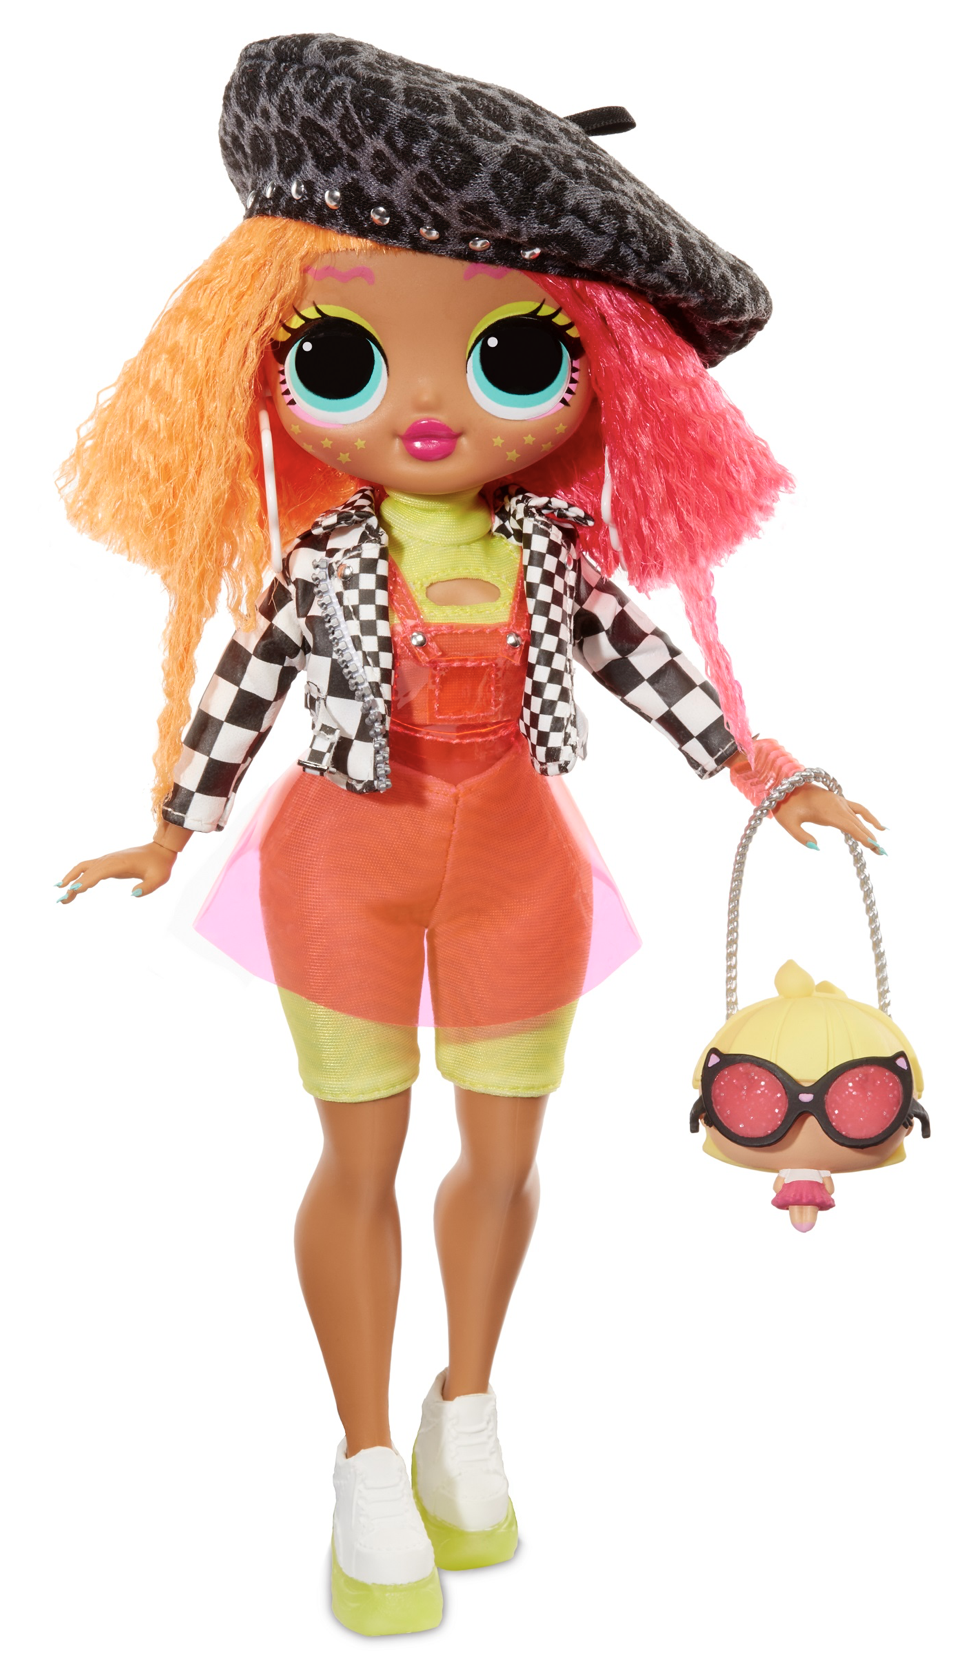 LOL Surprise OMG Neonlicious Fashion Doll - LOL Neonlicious - image 1 of 3